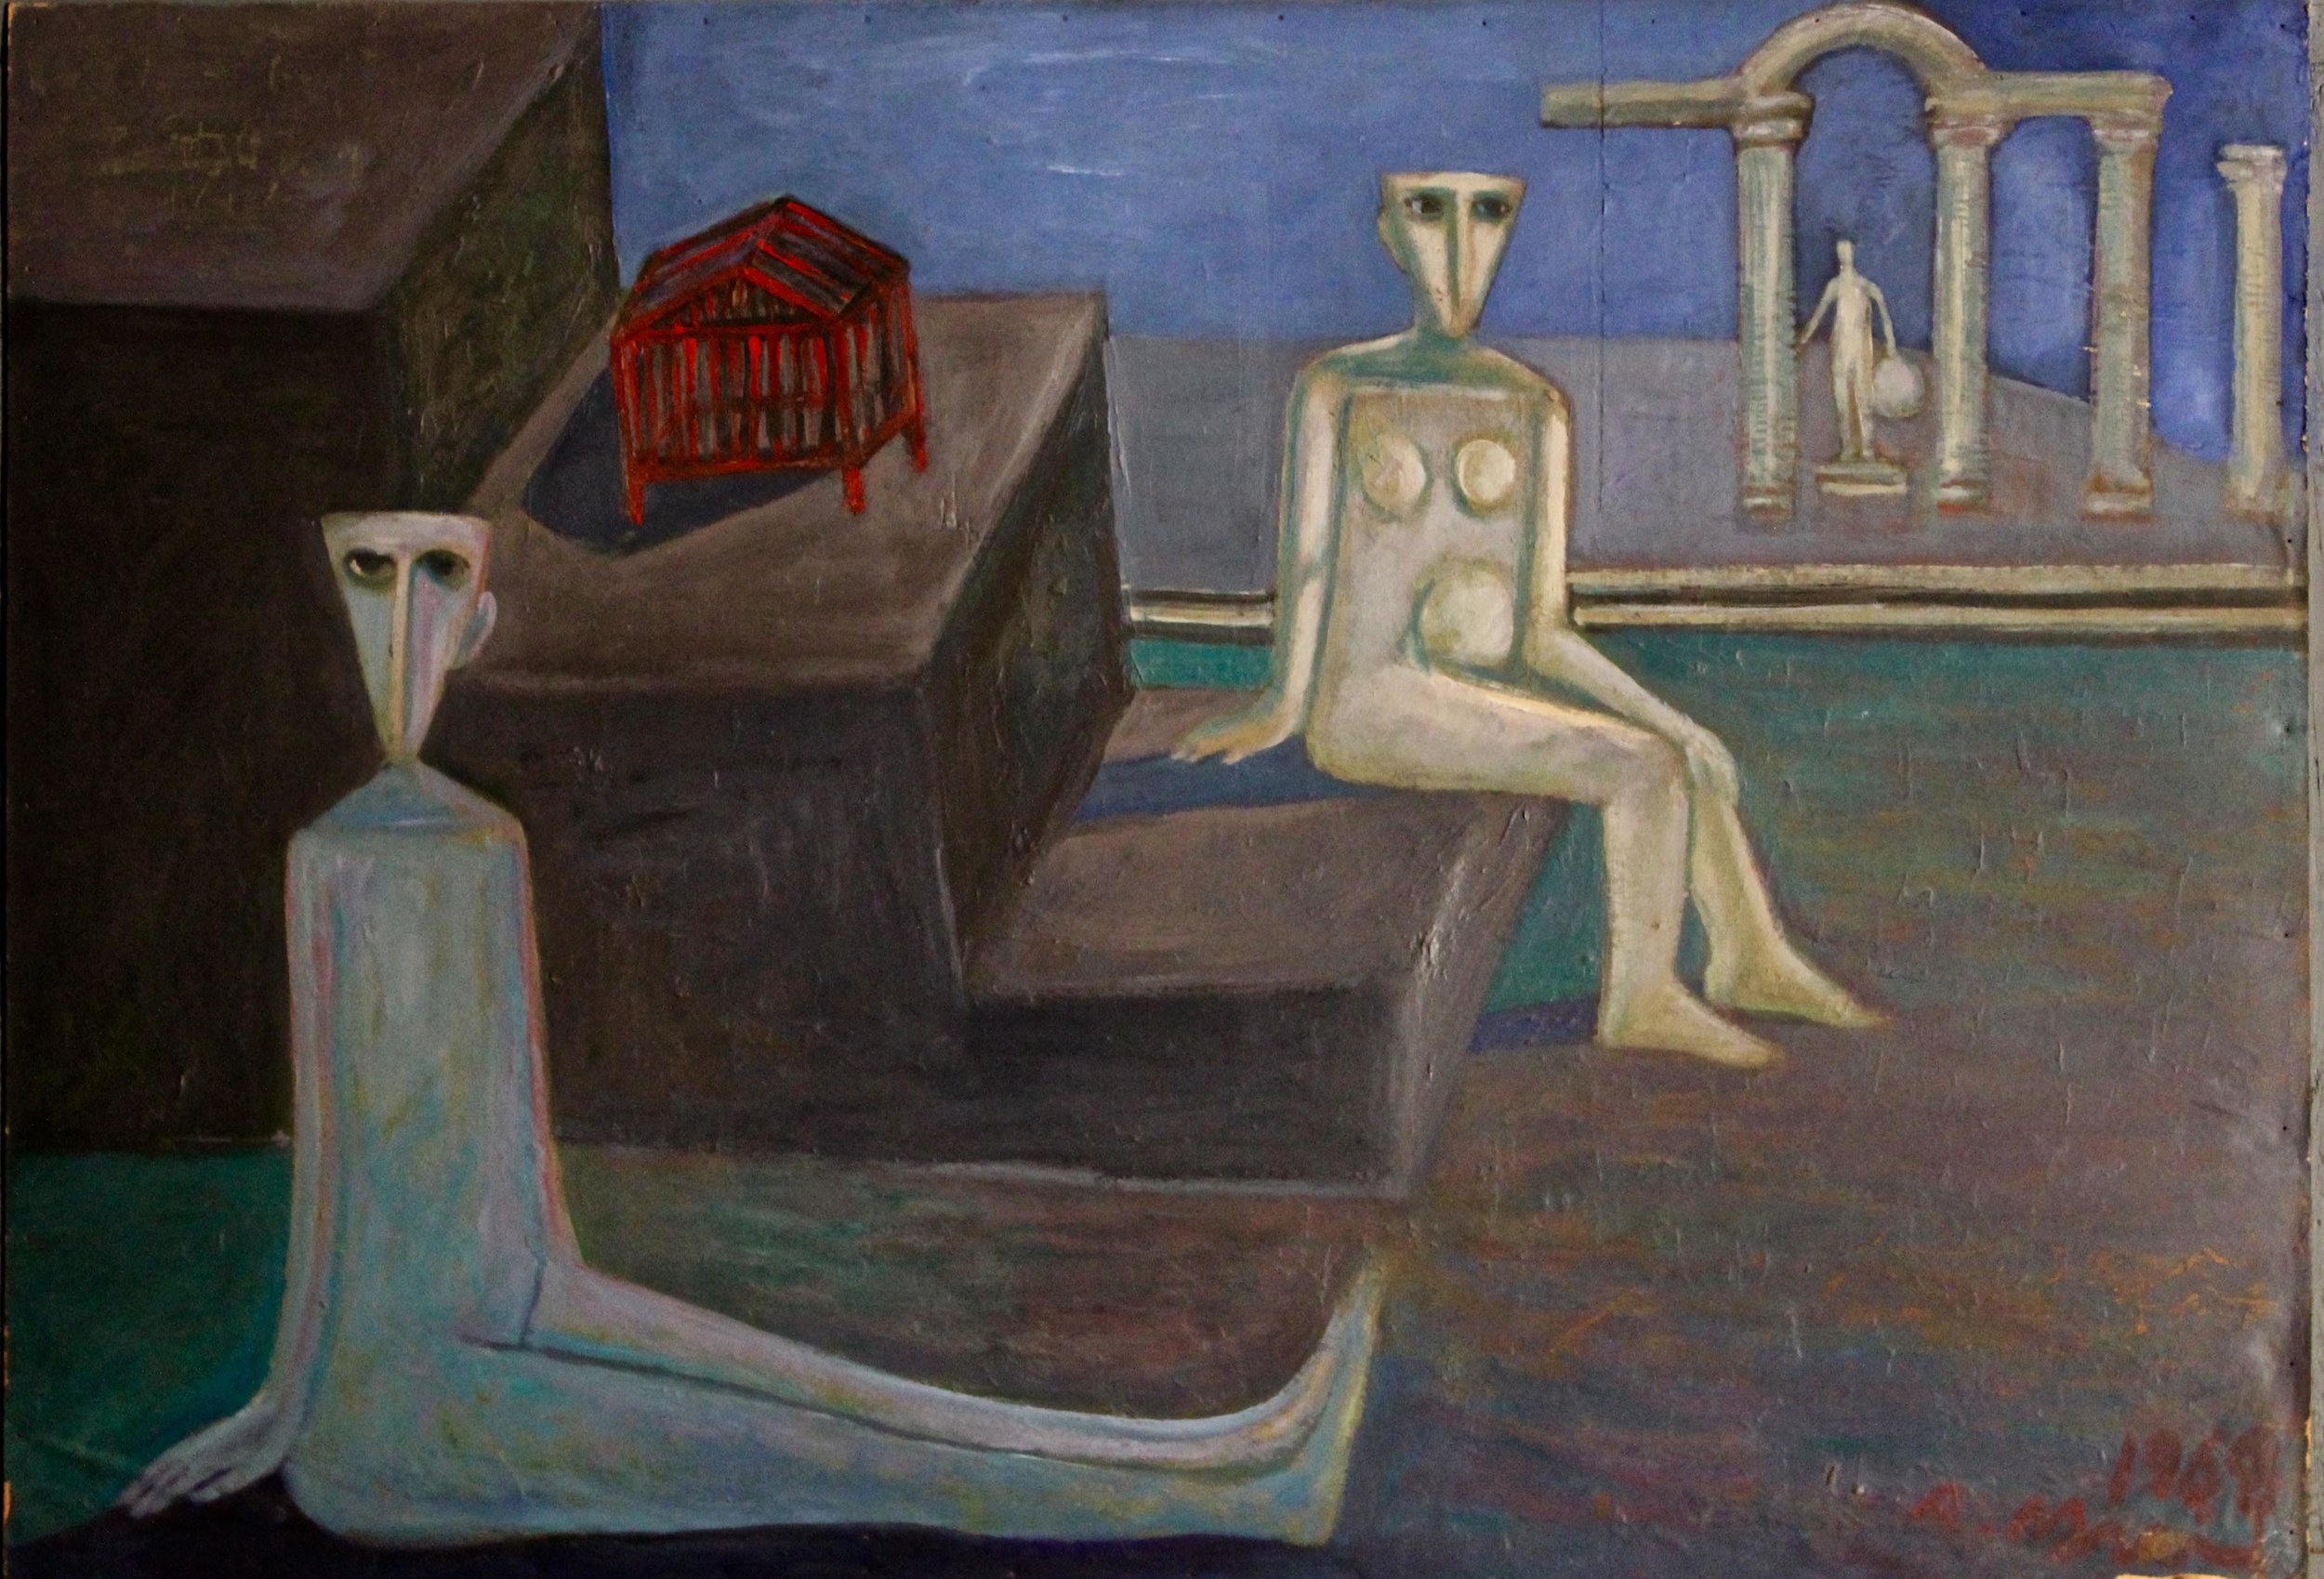  Red Cage, 1968, Oil on wood, 70 x 100 cm  